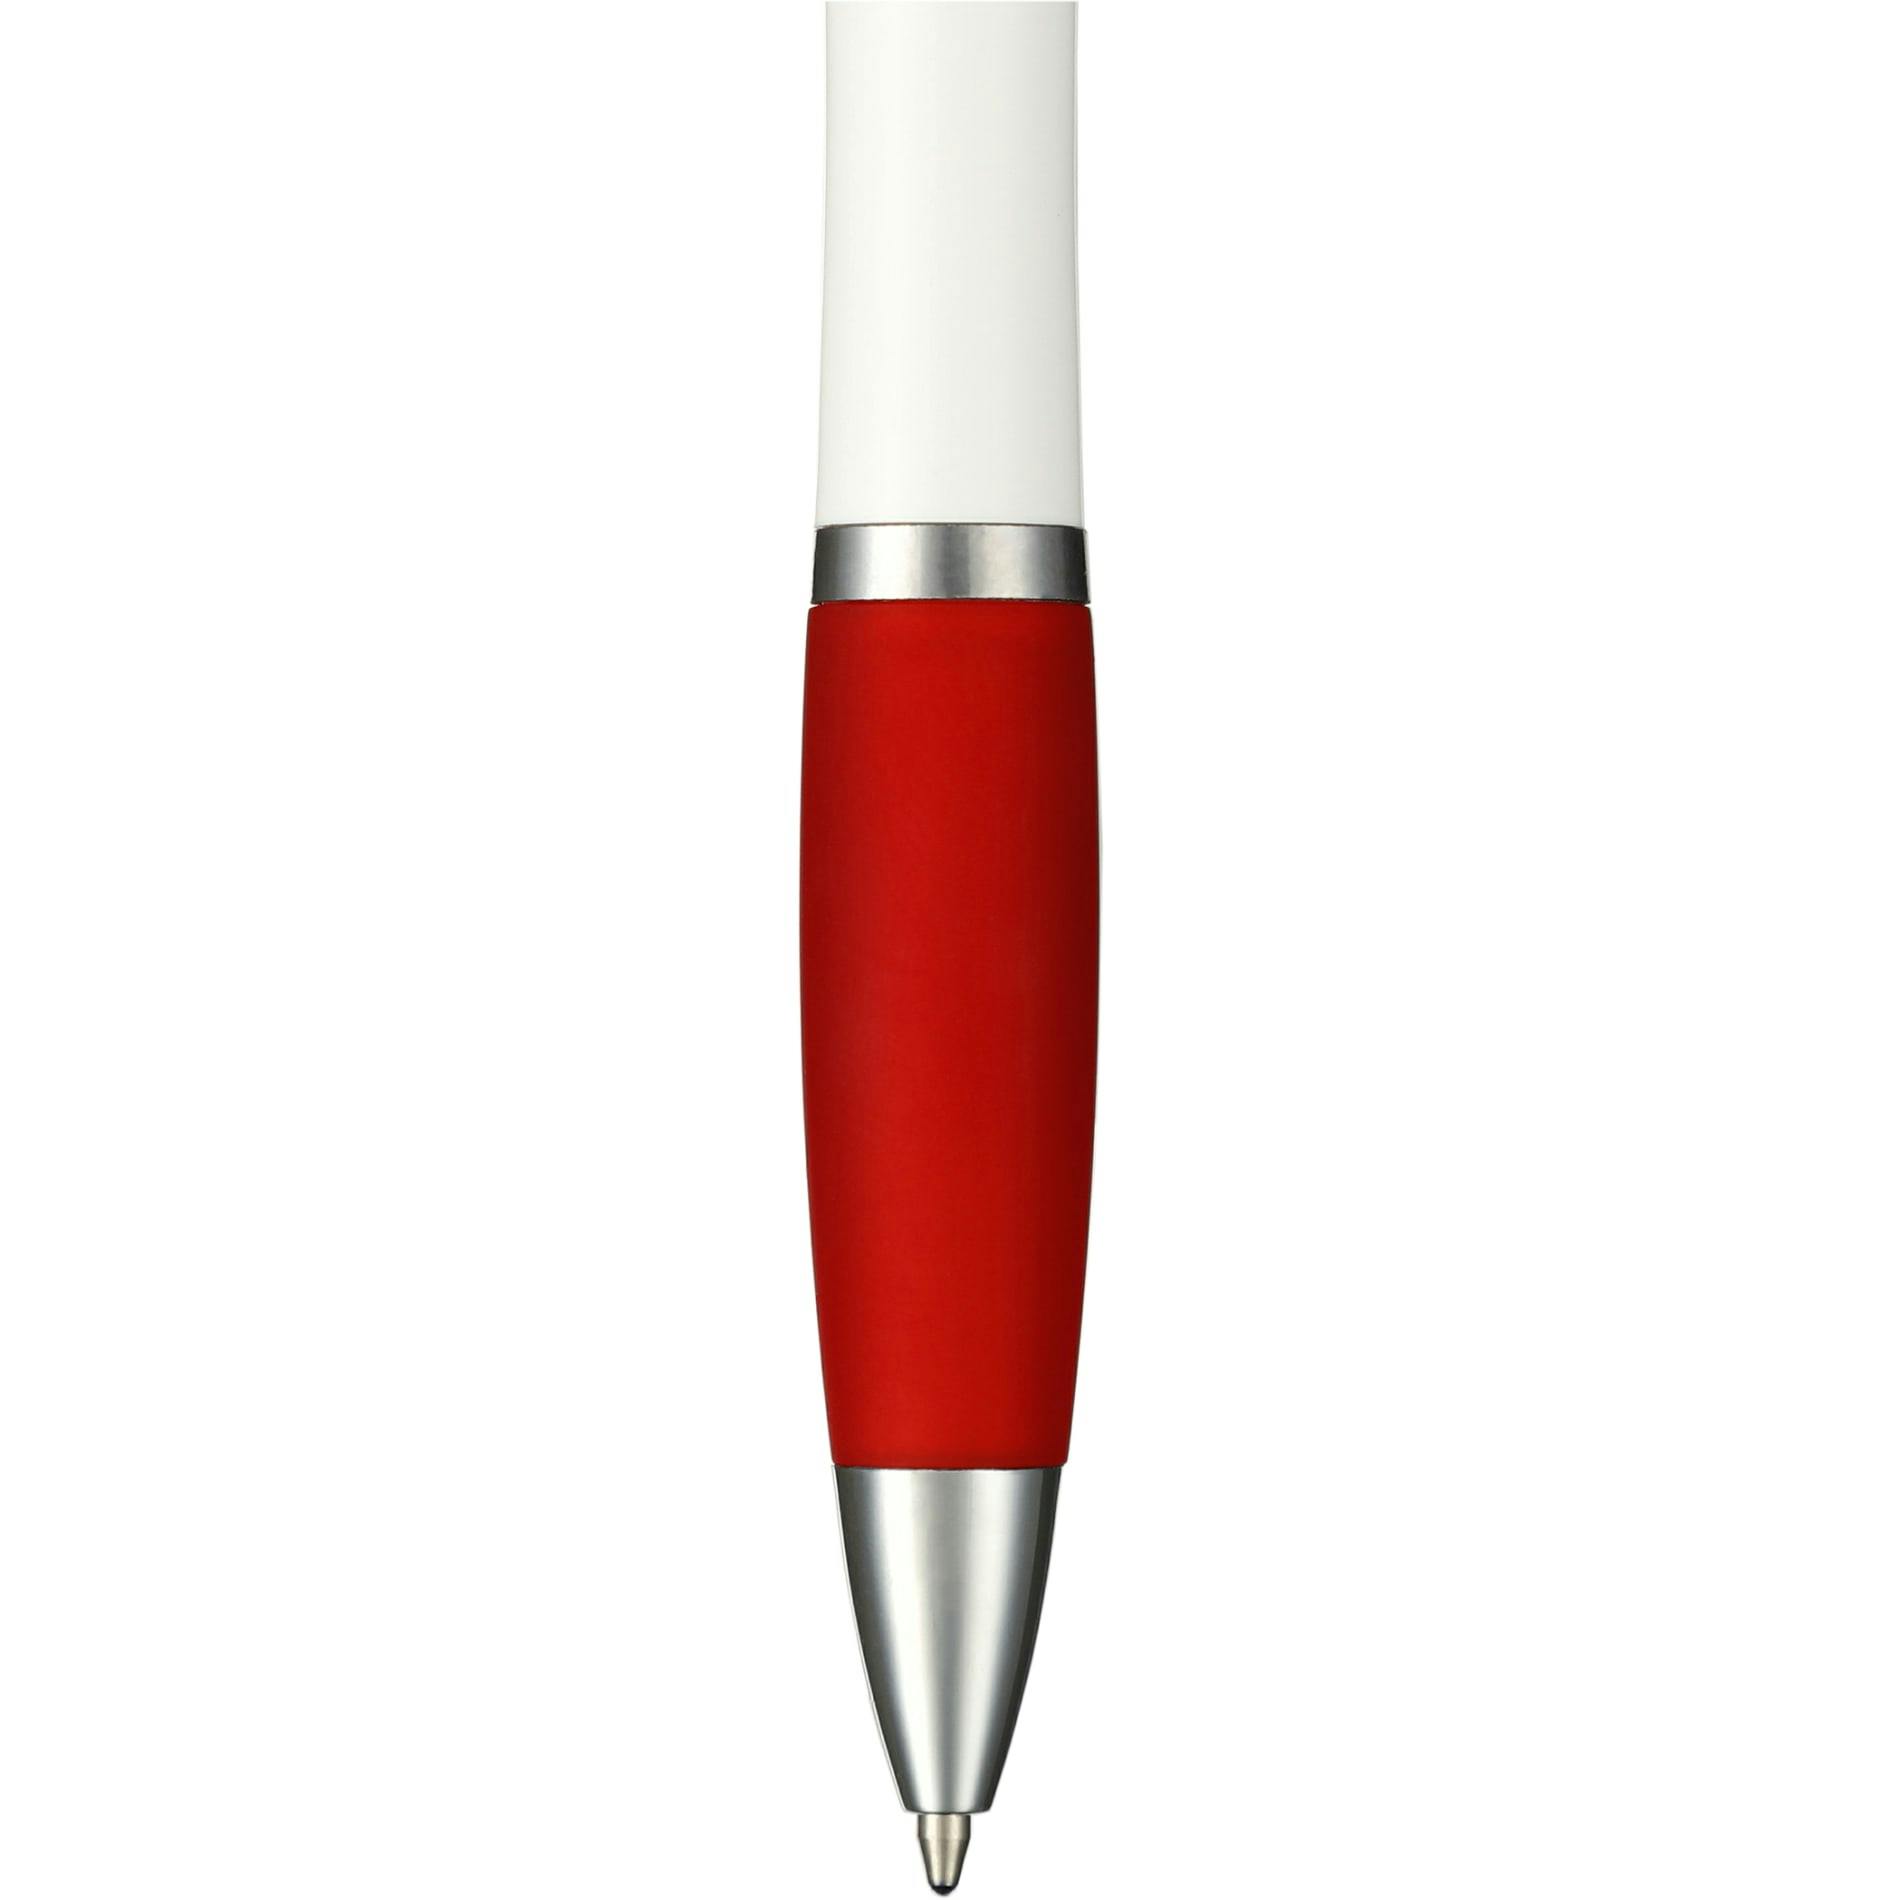 Nash Ballpoint Stylus with Antimicrobial Additive - additional Image 2